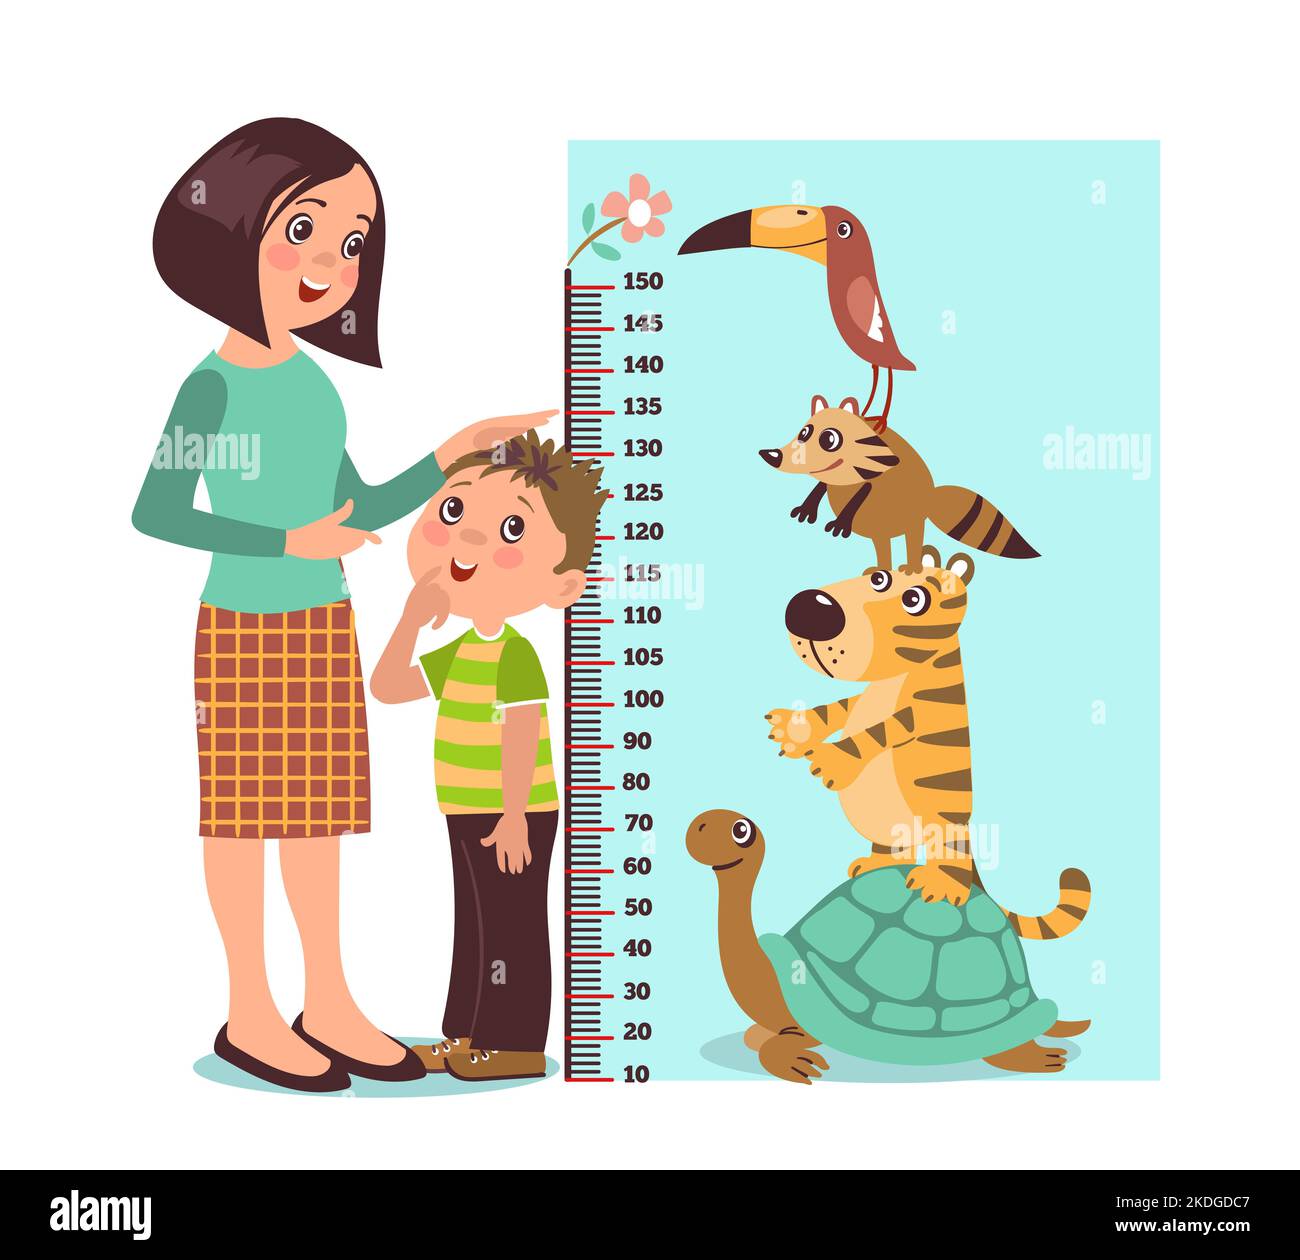 https://c8.alamy.com/comp/2KDGDC7/measuring-kids-height-with-parent-mom-helps-son-with-growth-scale-indicator-ruler-with-exotic-animals-cute-turtle-tiger-or-raccoon-childish-2KDGDC7.jpg